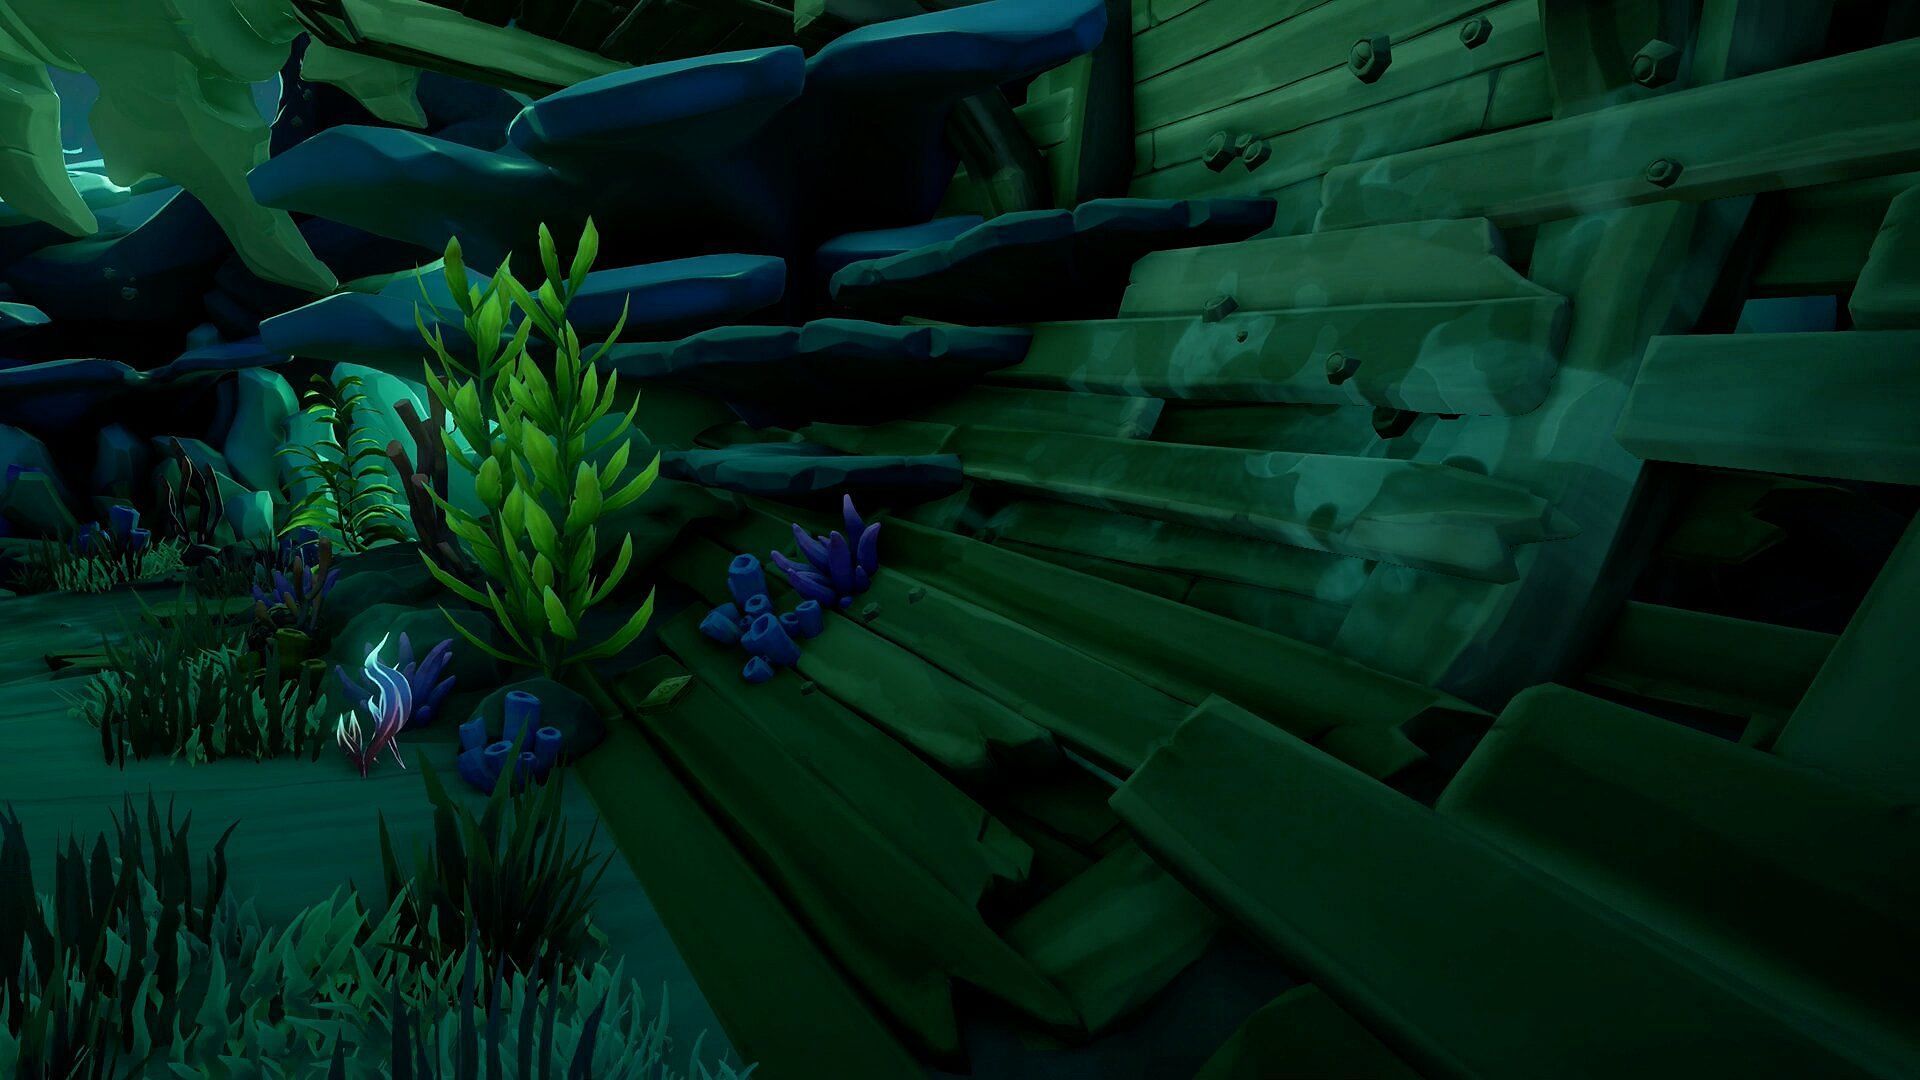 This journal is beside a blue plant (Image via Sea of Thieves)